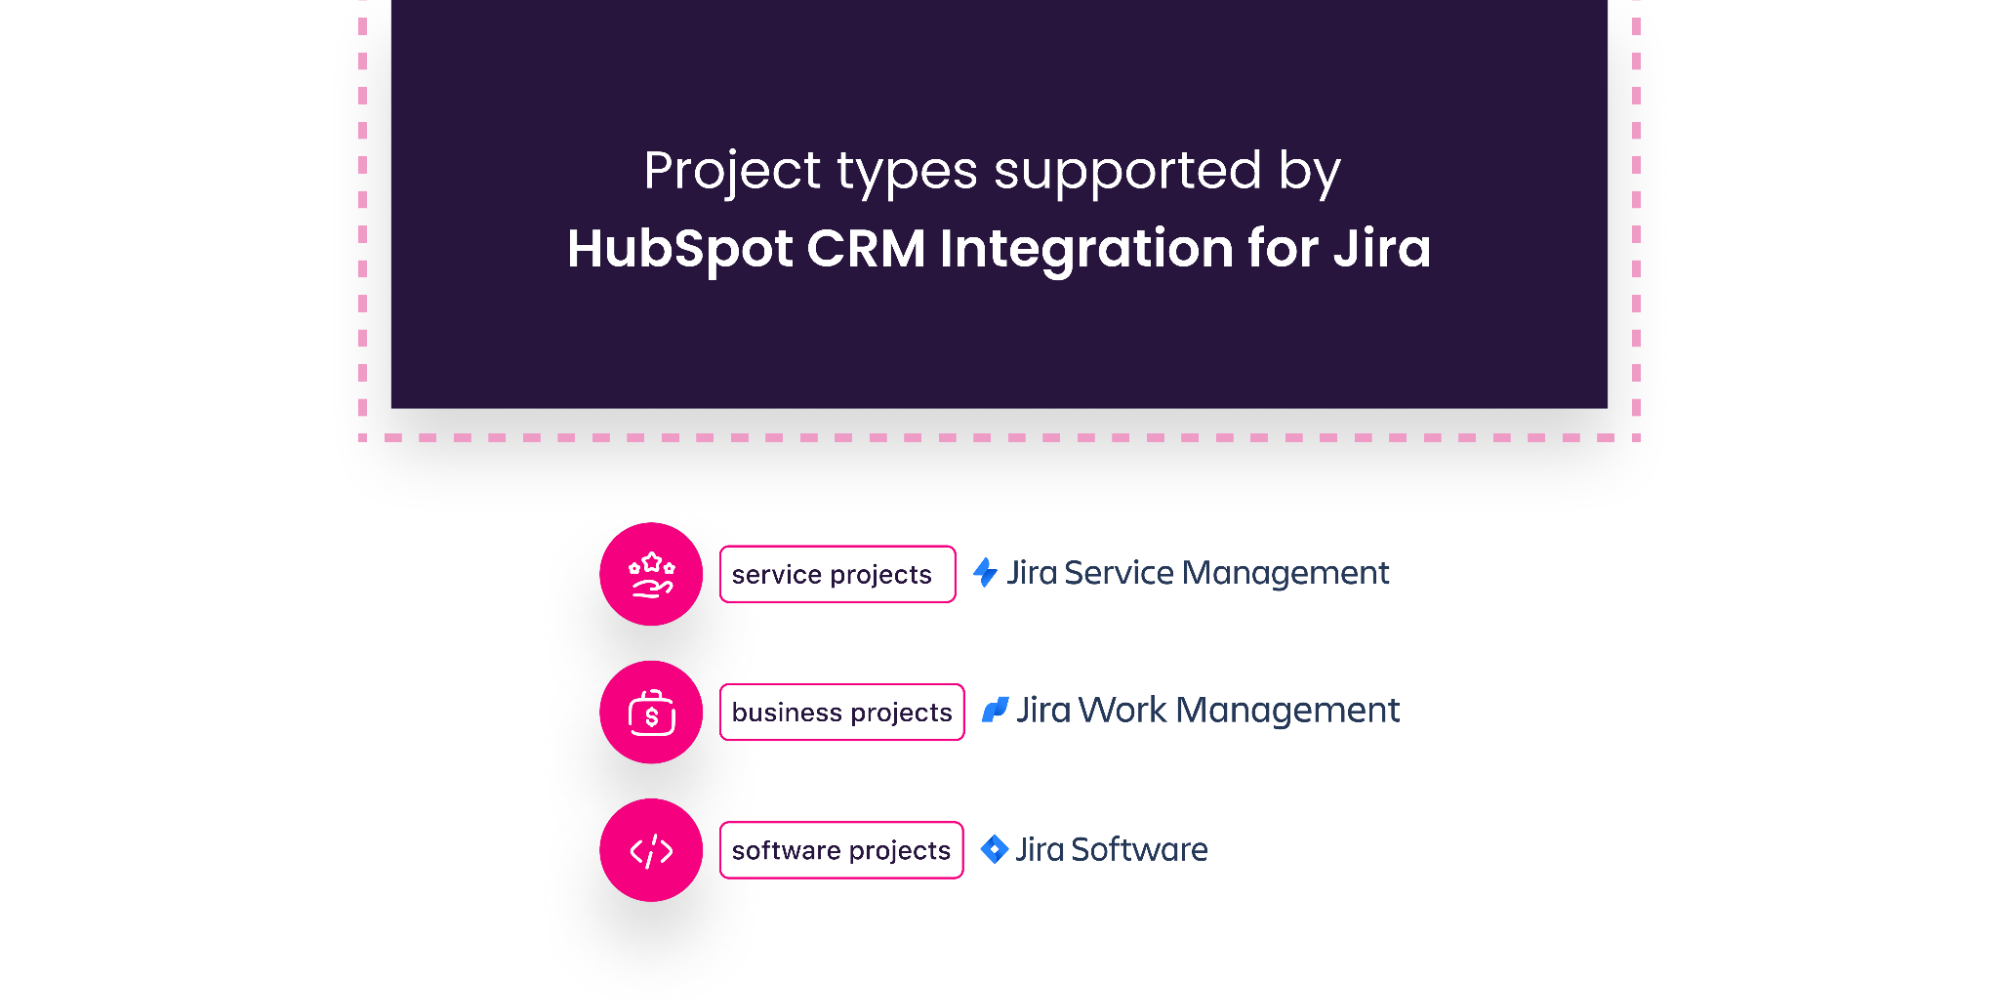 Project types in HubSpot CRM Integration for Jira